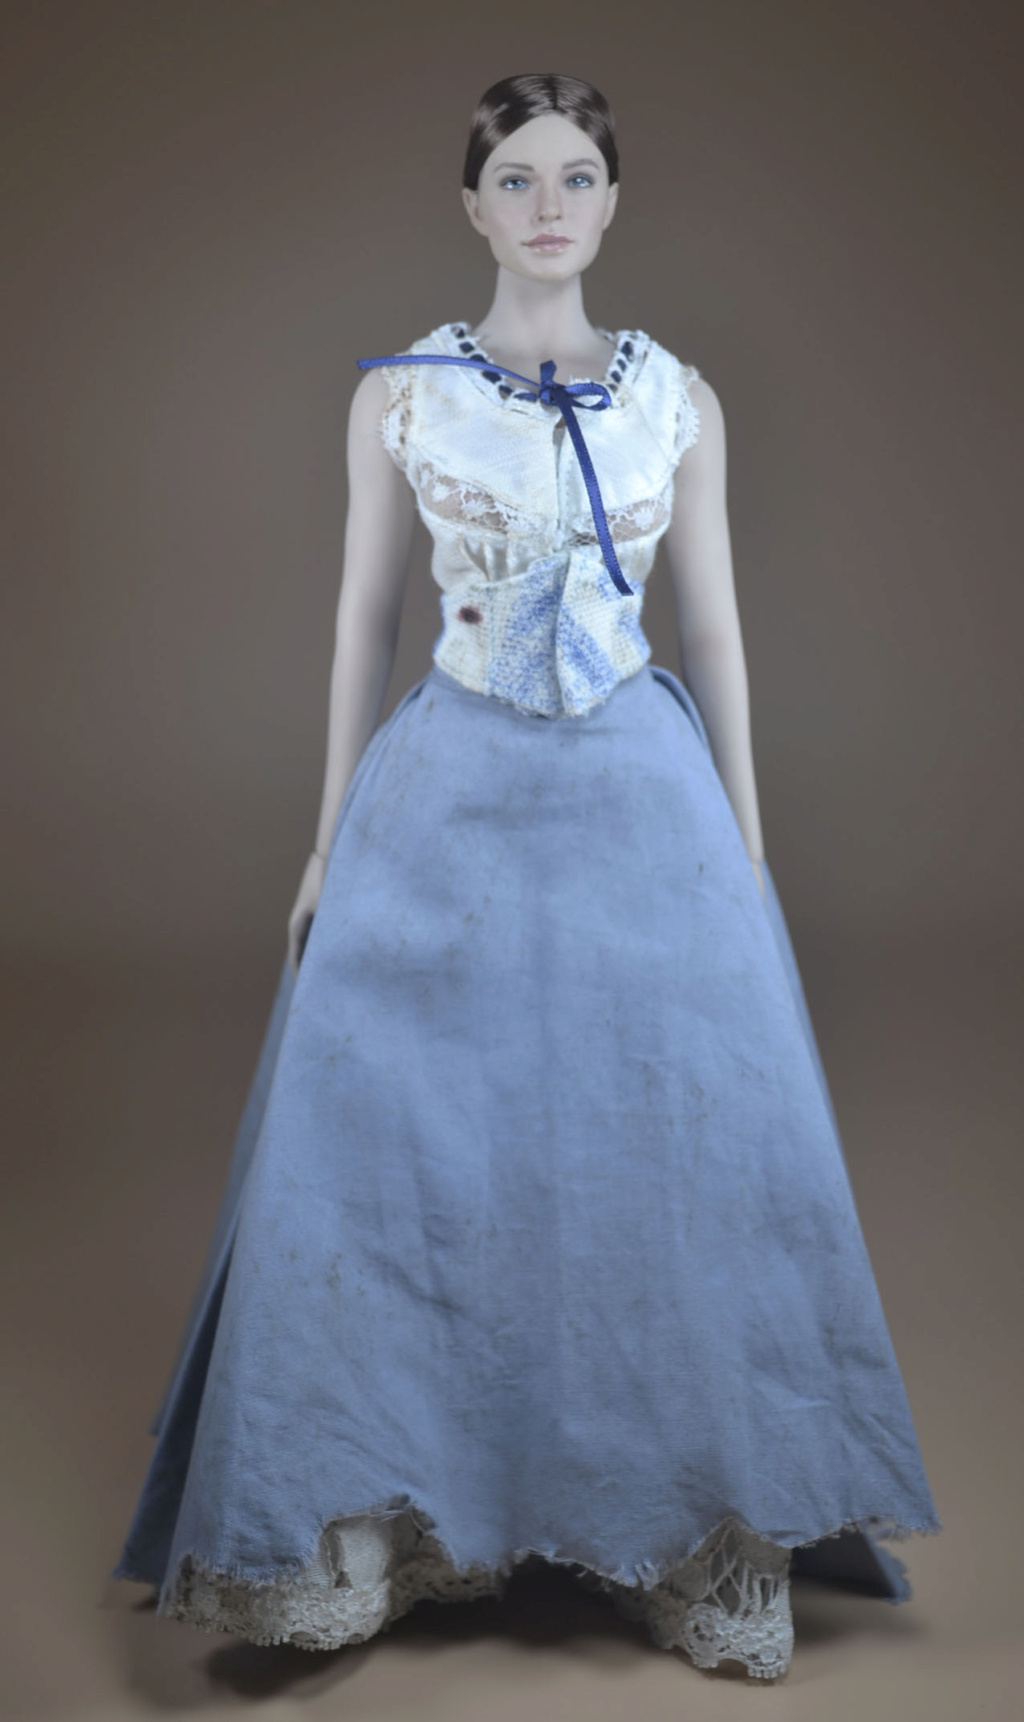 NEW PRODUCT: Wolford Toys: 1/6 Western Vintage Dress WF-2021AB _dsc3725